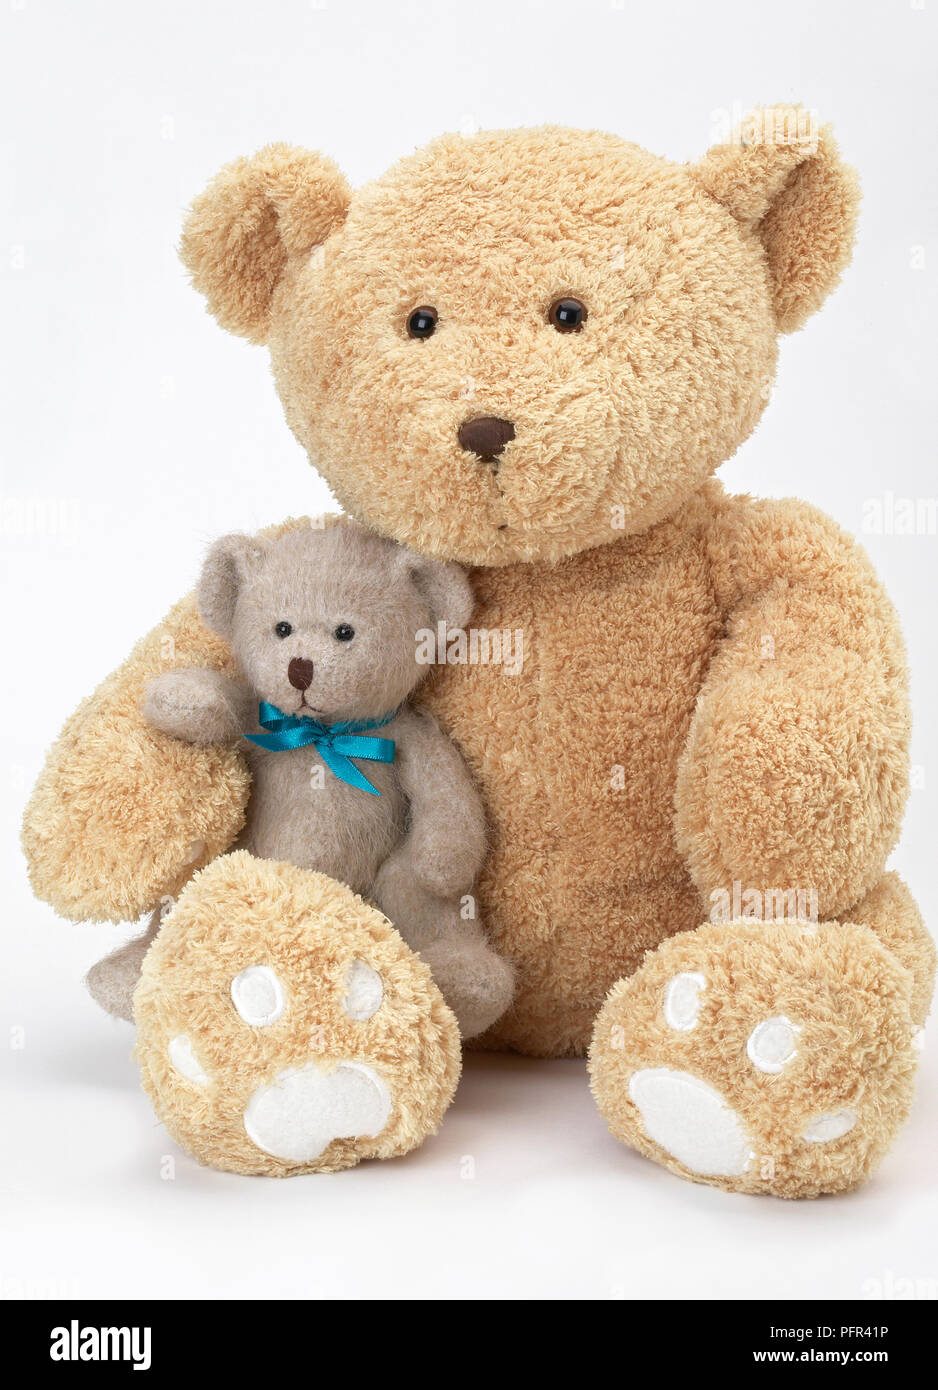 Large teddy bear and baby teddy bear sitting together Stock Photo